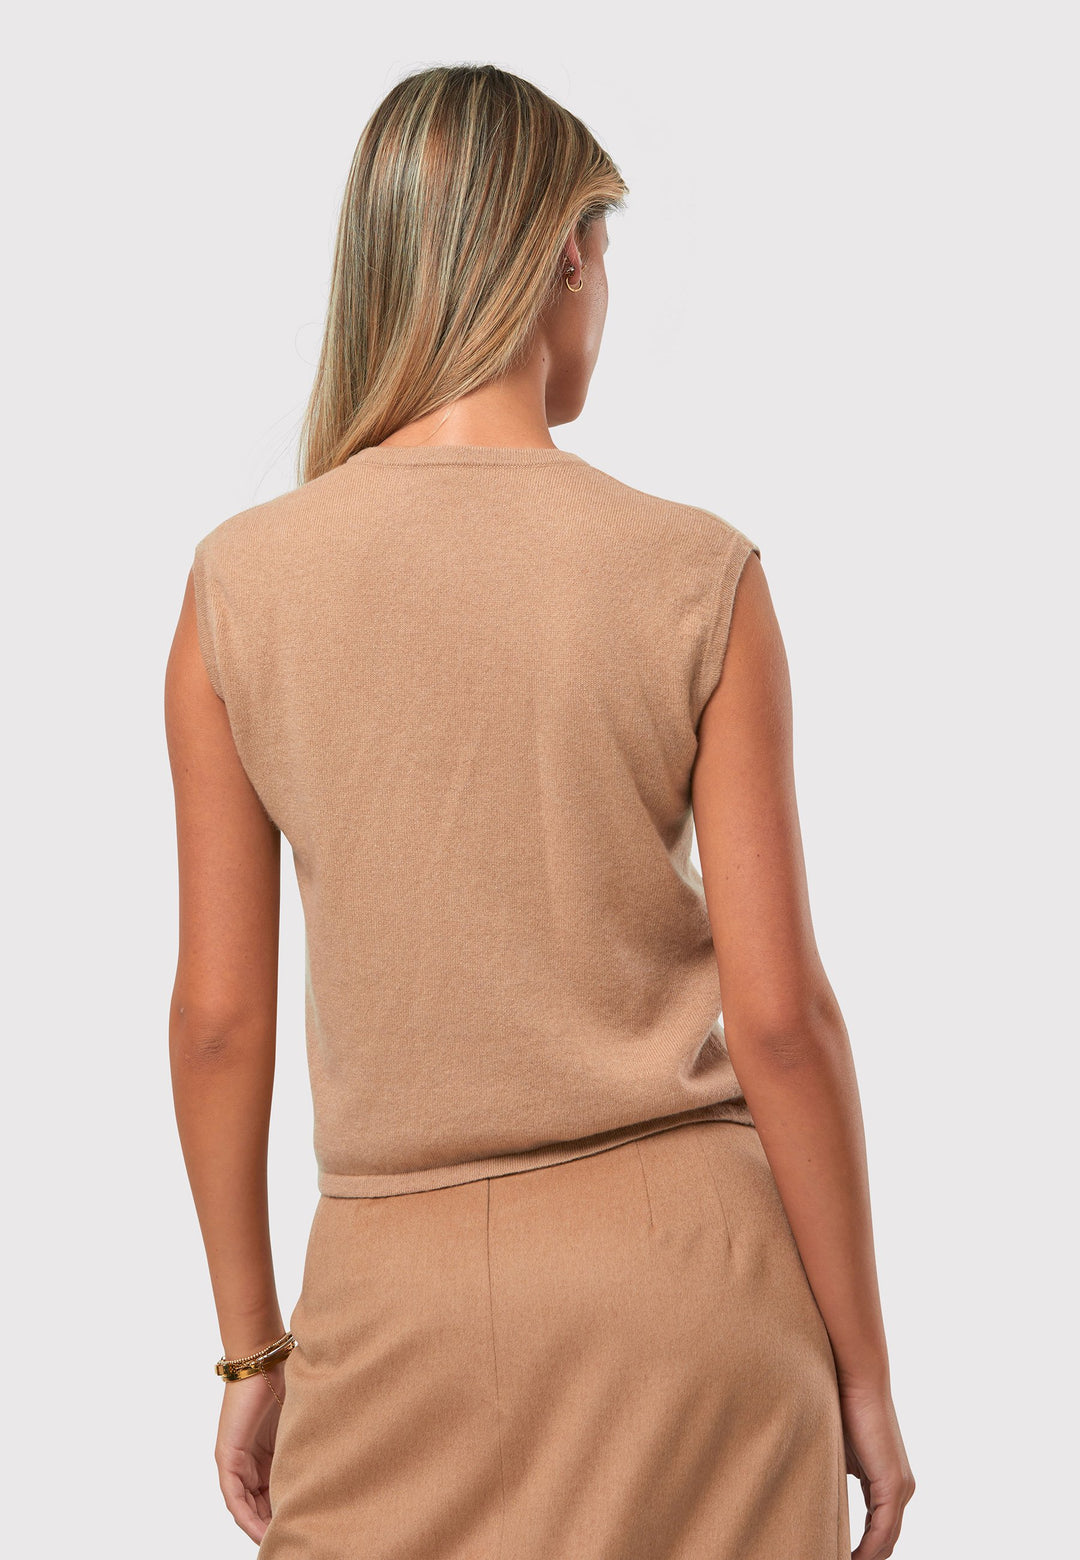 The Marlena Camel Cashmere Sweater-Vest is a sleeveless round-neck top that offers versatile styling options. Wear it as a simple underpinning for the matching ballet wrap to complete a coordinated look. Alternatively, layer it as a sweater vest over your favorite crisp white shirts for a stylish and contemporary outfit. Made from luxurious cashmere, the Marlena Sweater-Vest adds an extra layer of comfort and sophistication to your wardrobe.